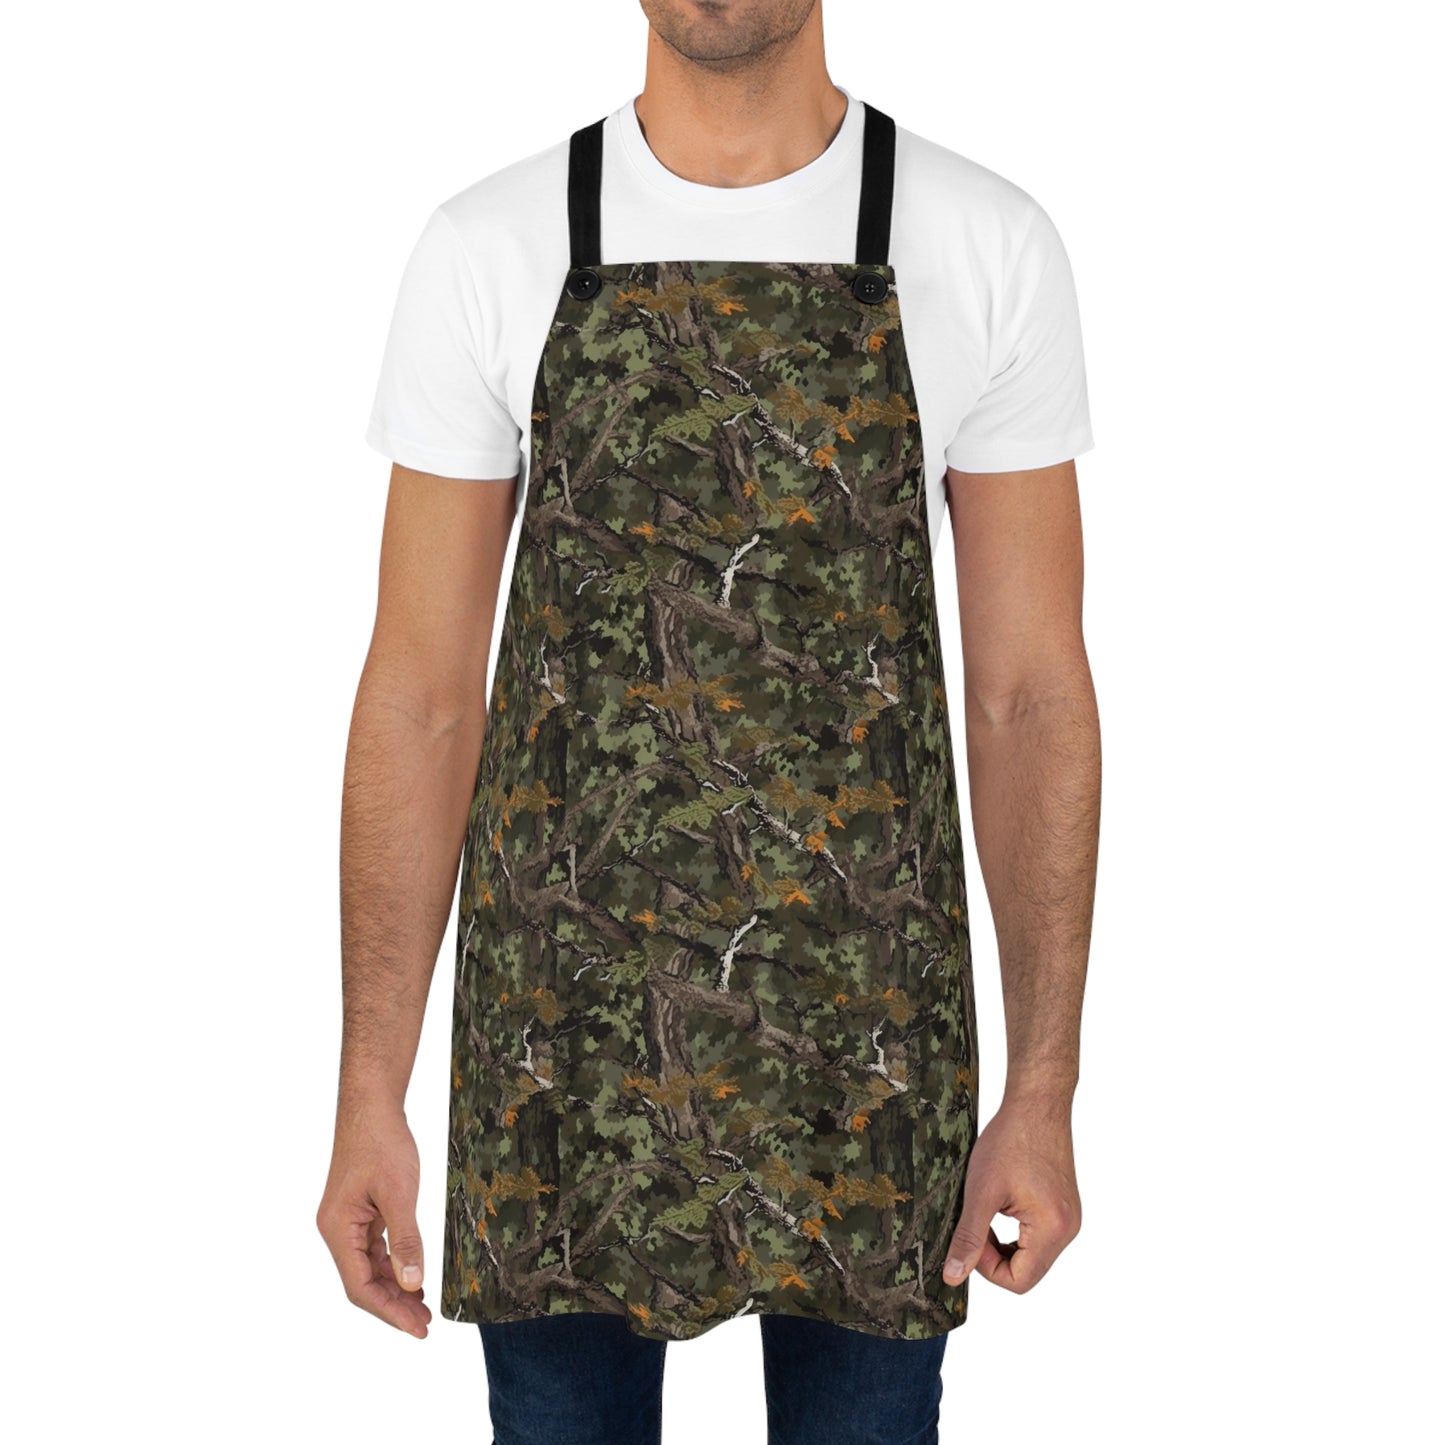 Stealthy Hunter: Hunting Camouflage - Kitchen Chef Apron